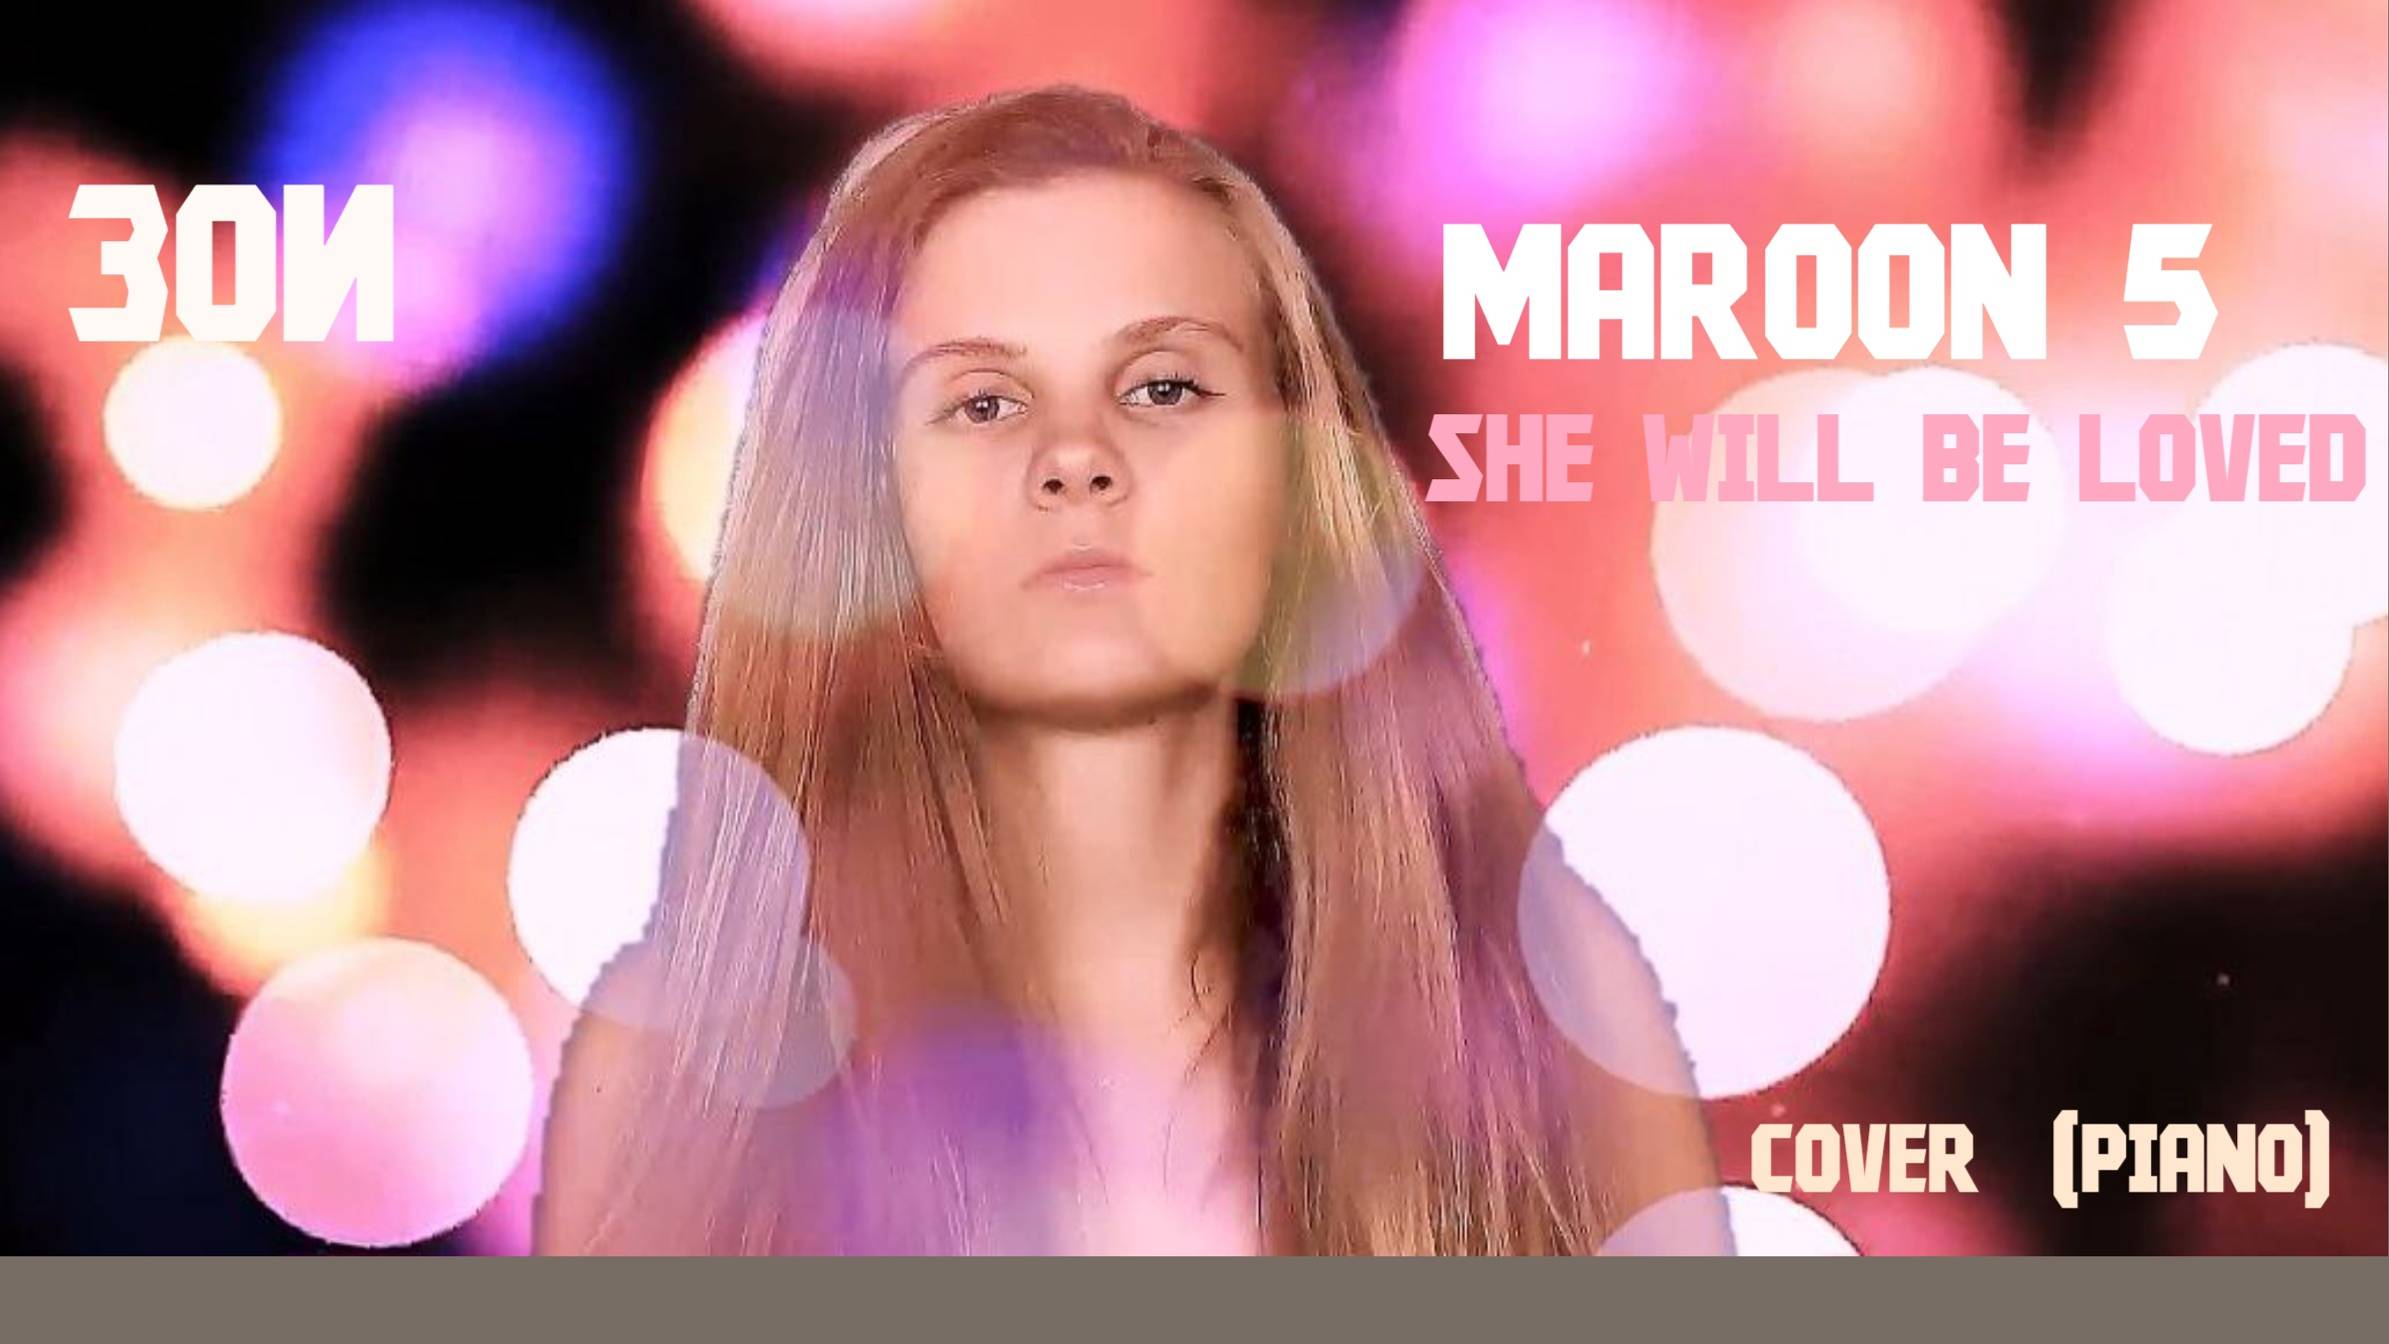 ЗОИ  cover Maroon5 "She will be loved"